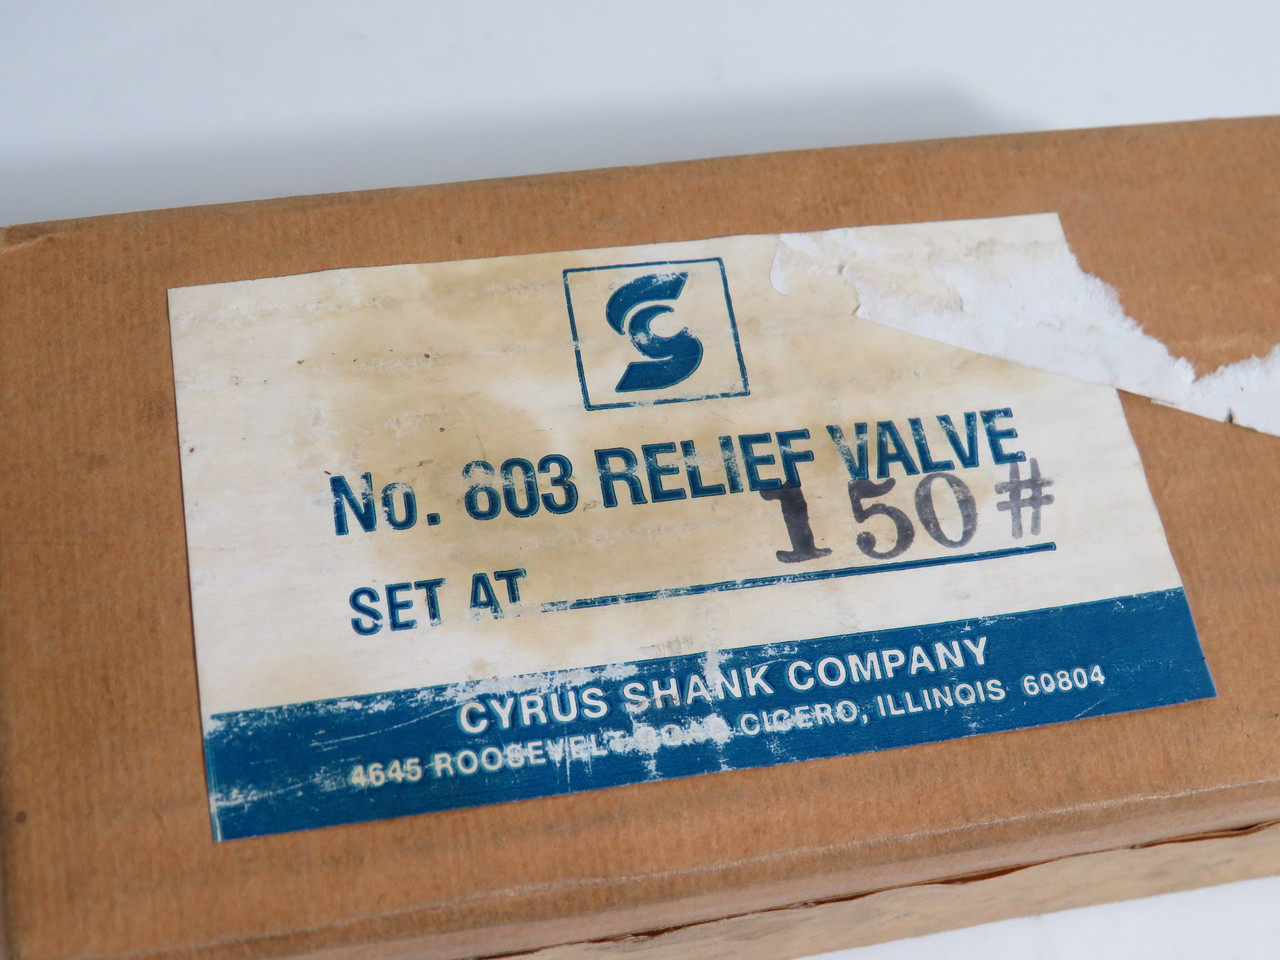 Cyrus Shank 803-150 Relief Valve 150Psi 1/2", 3/4" NPT *Sealed* NEW